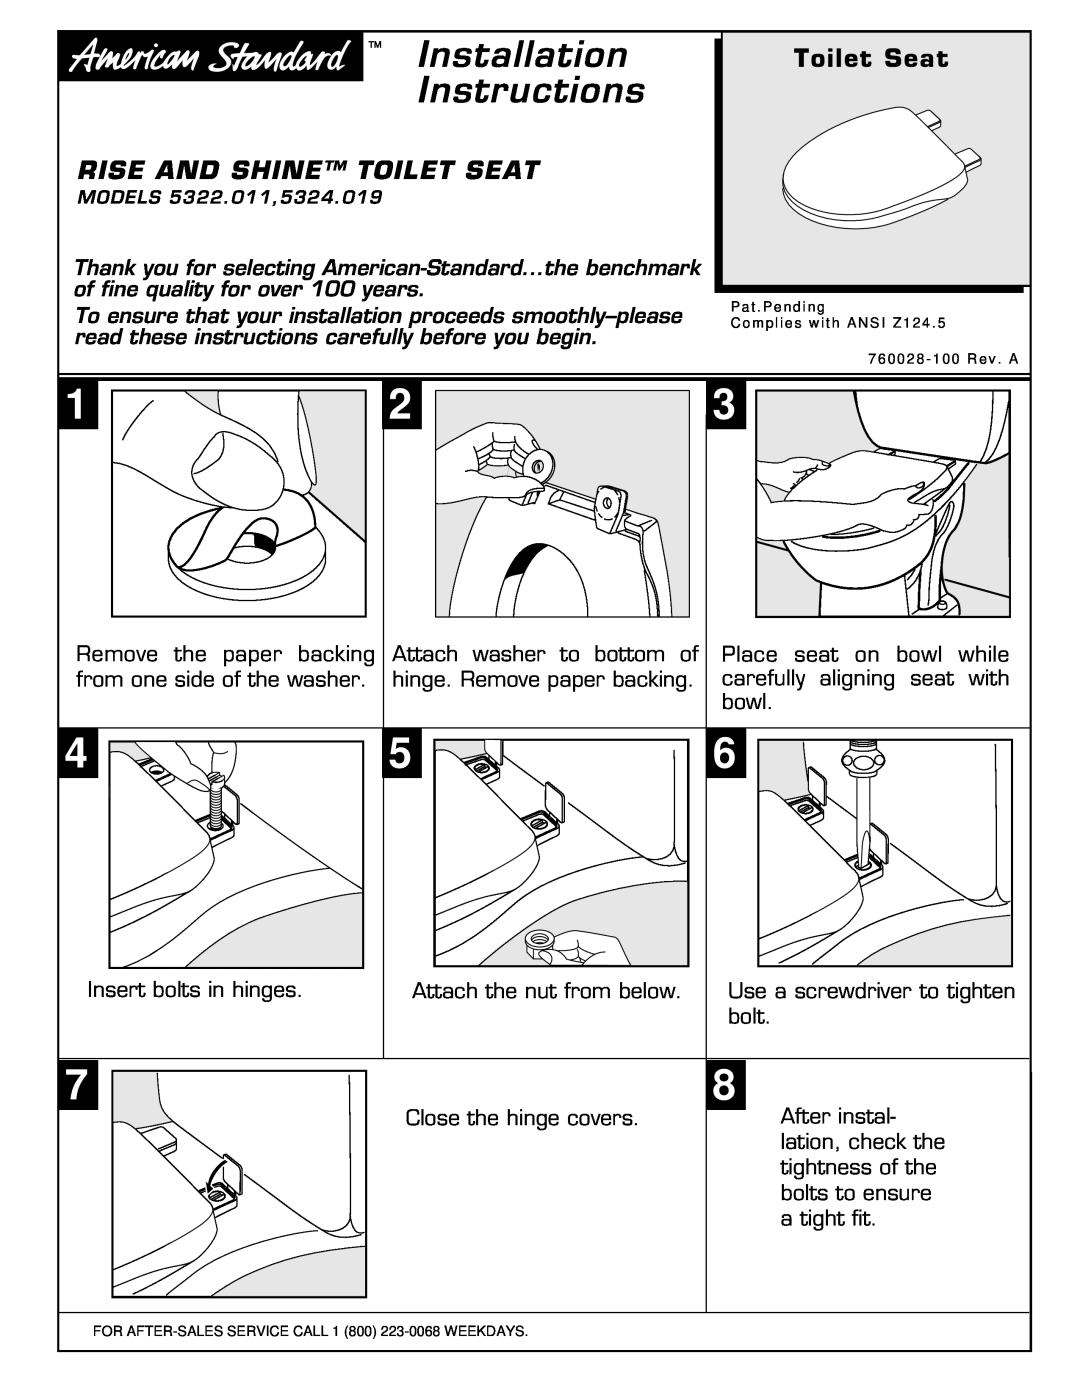 American Standard 5324.019, 5322.011 manual Installation Instructions, Rise And Shine Toilet Seat 